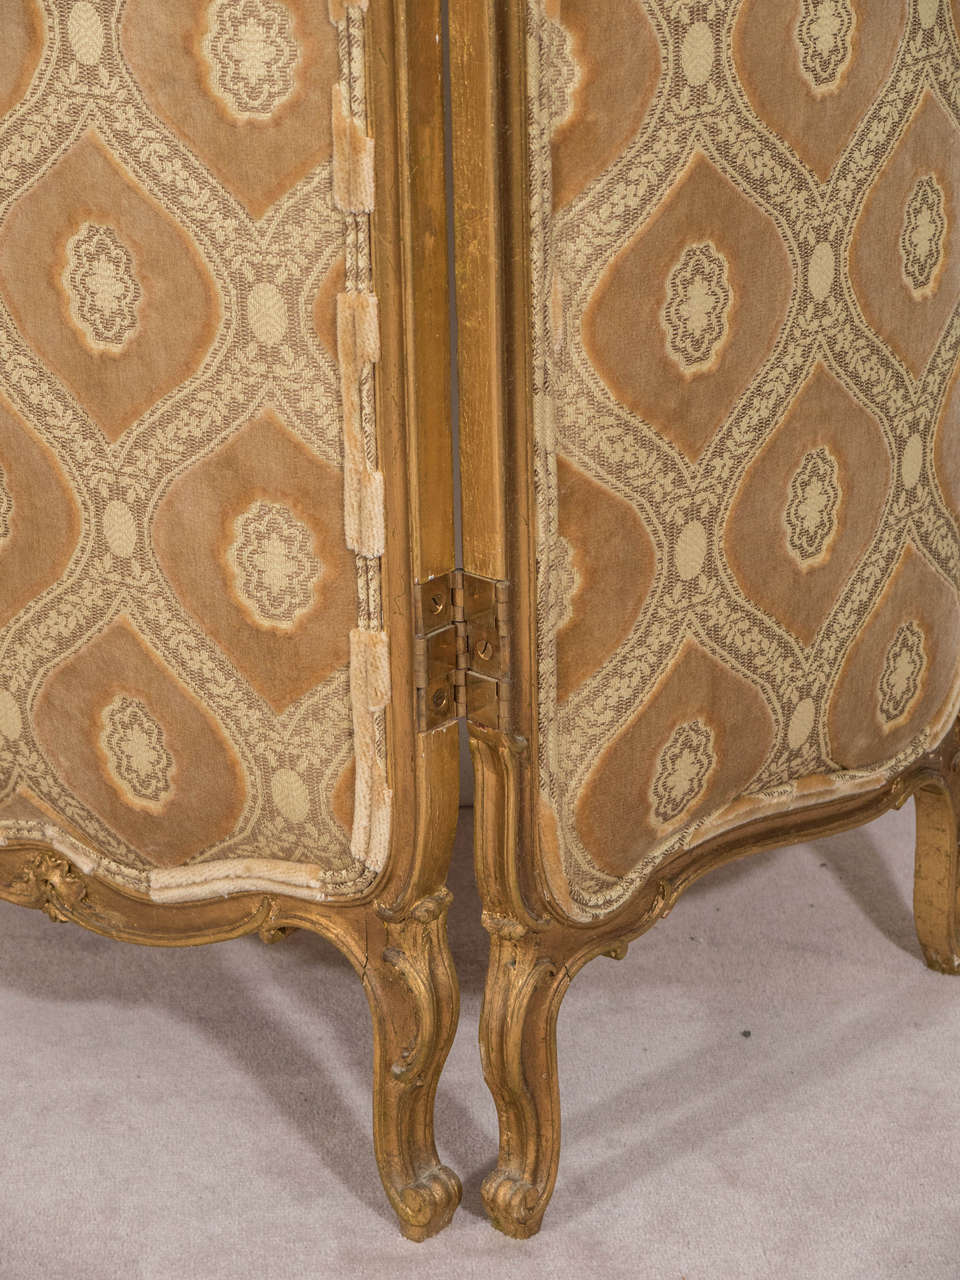 French Gilt Wood Trifold Screen with Beveled Glass, circa 1920s For Sale 1